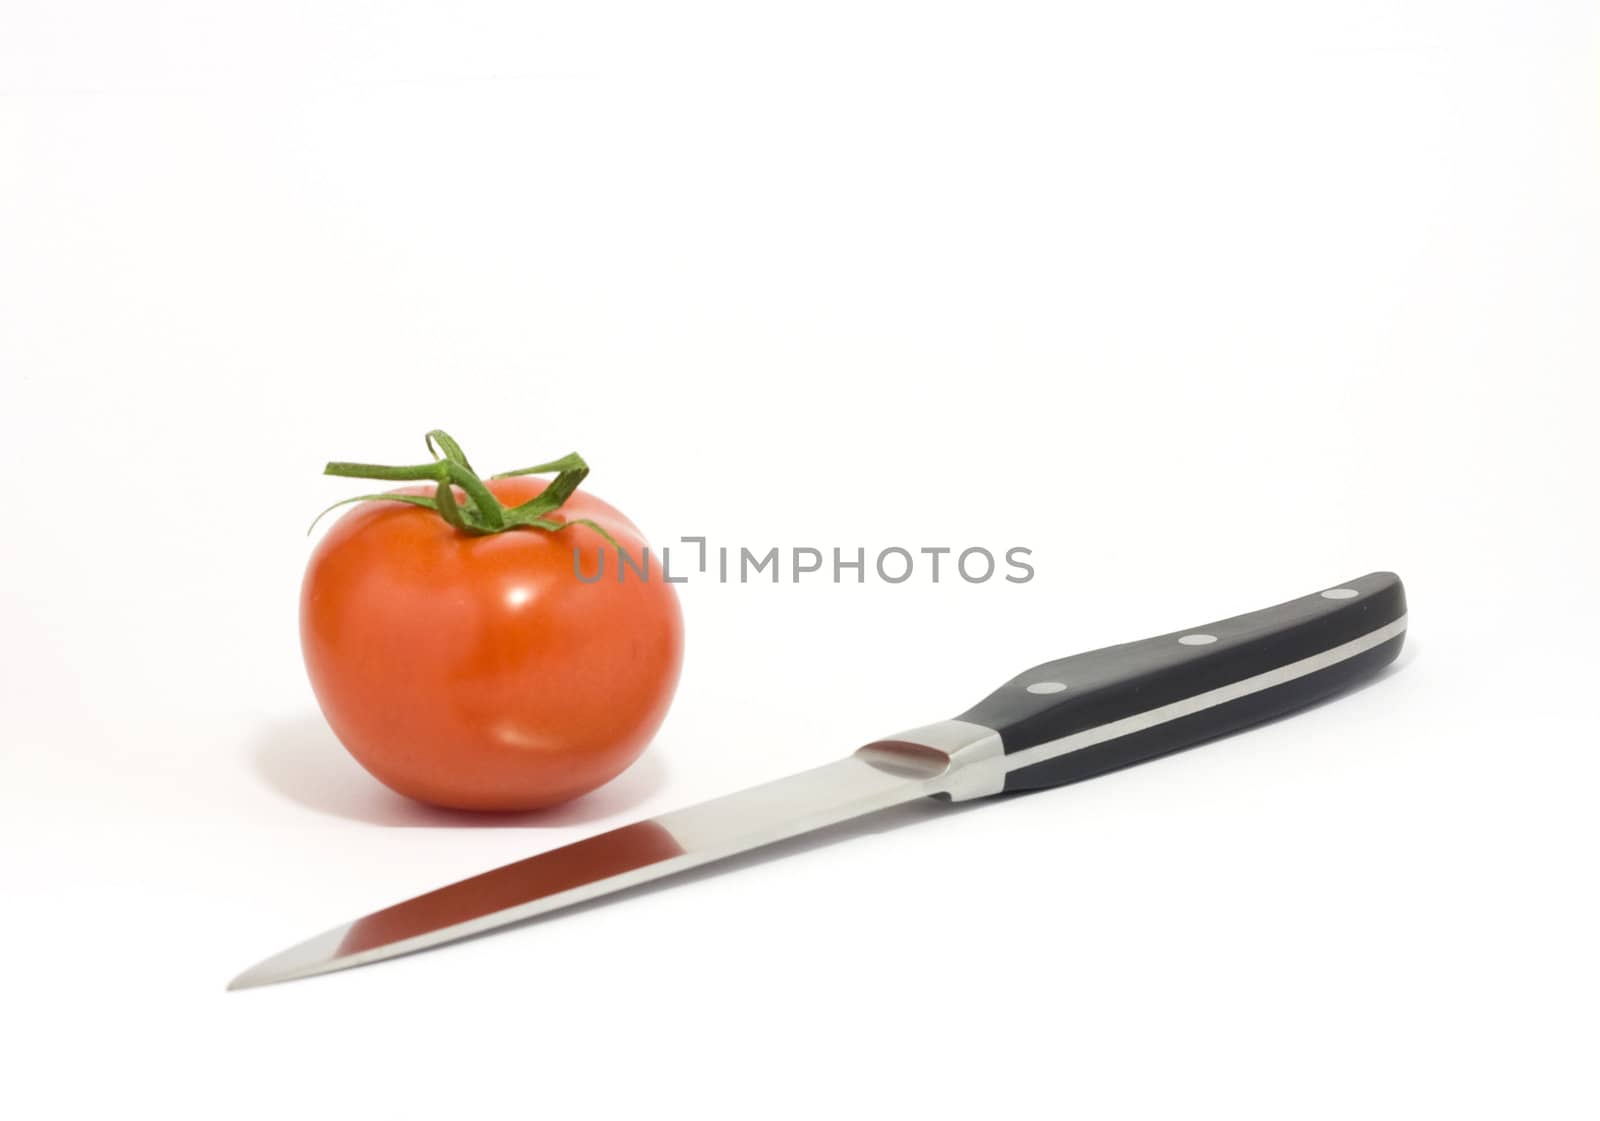 Knife and tomato by ursolv